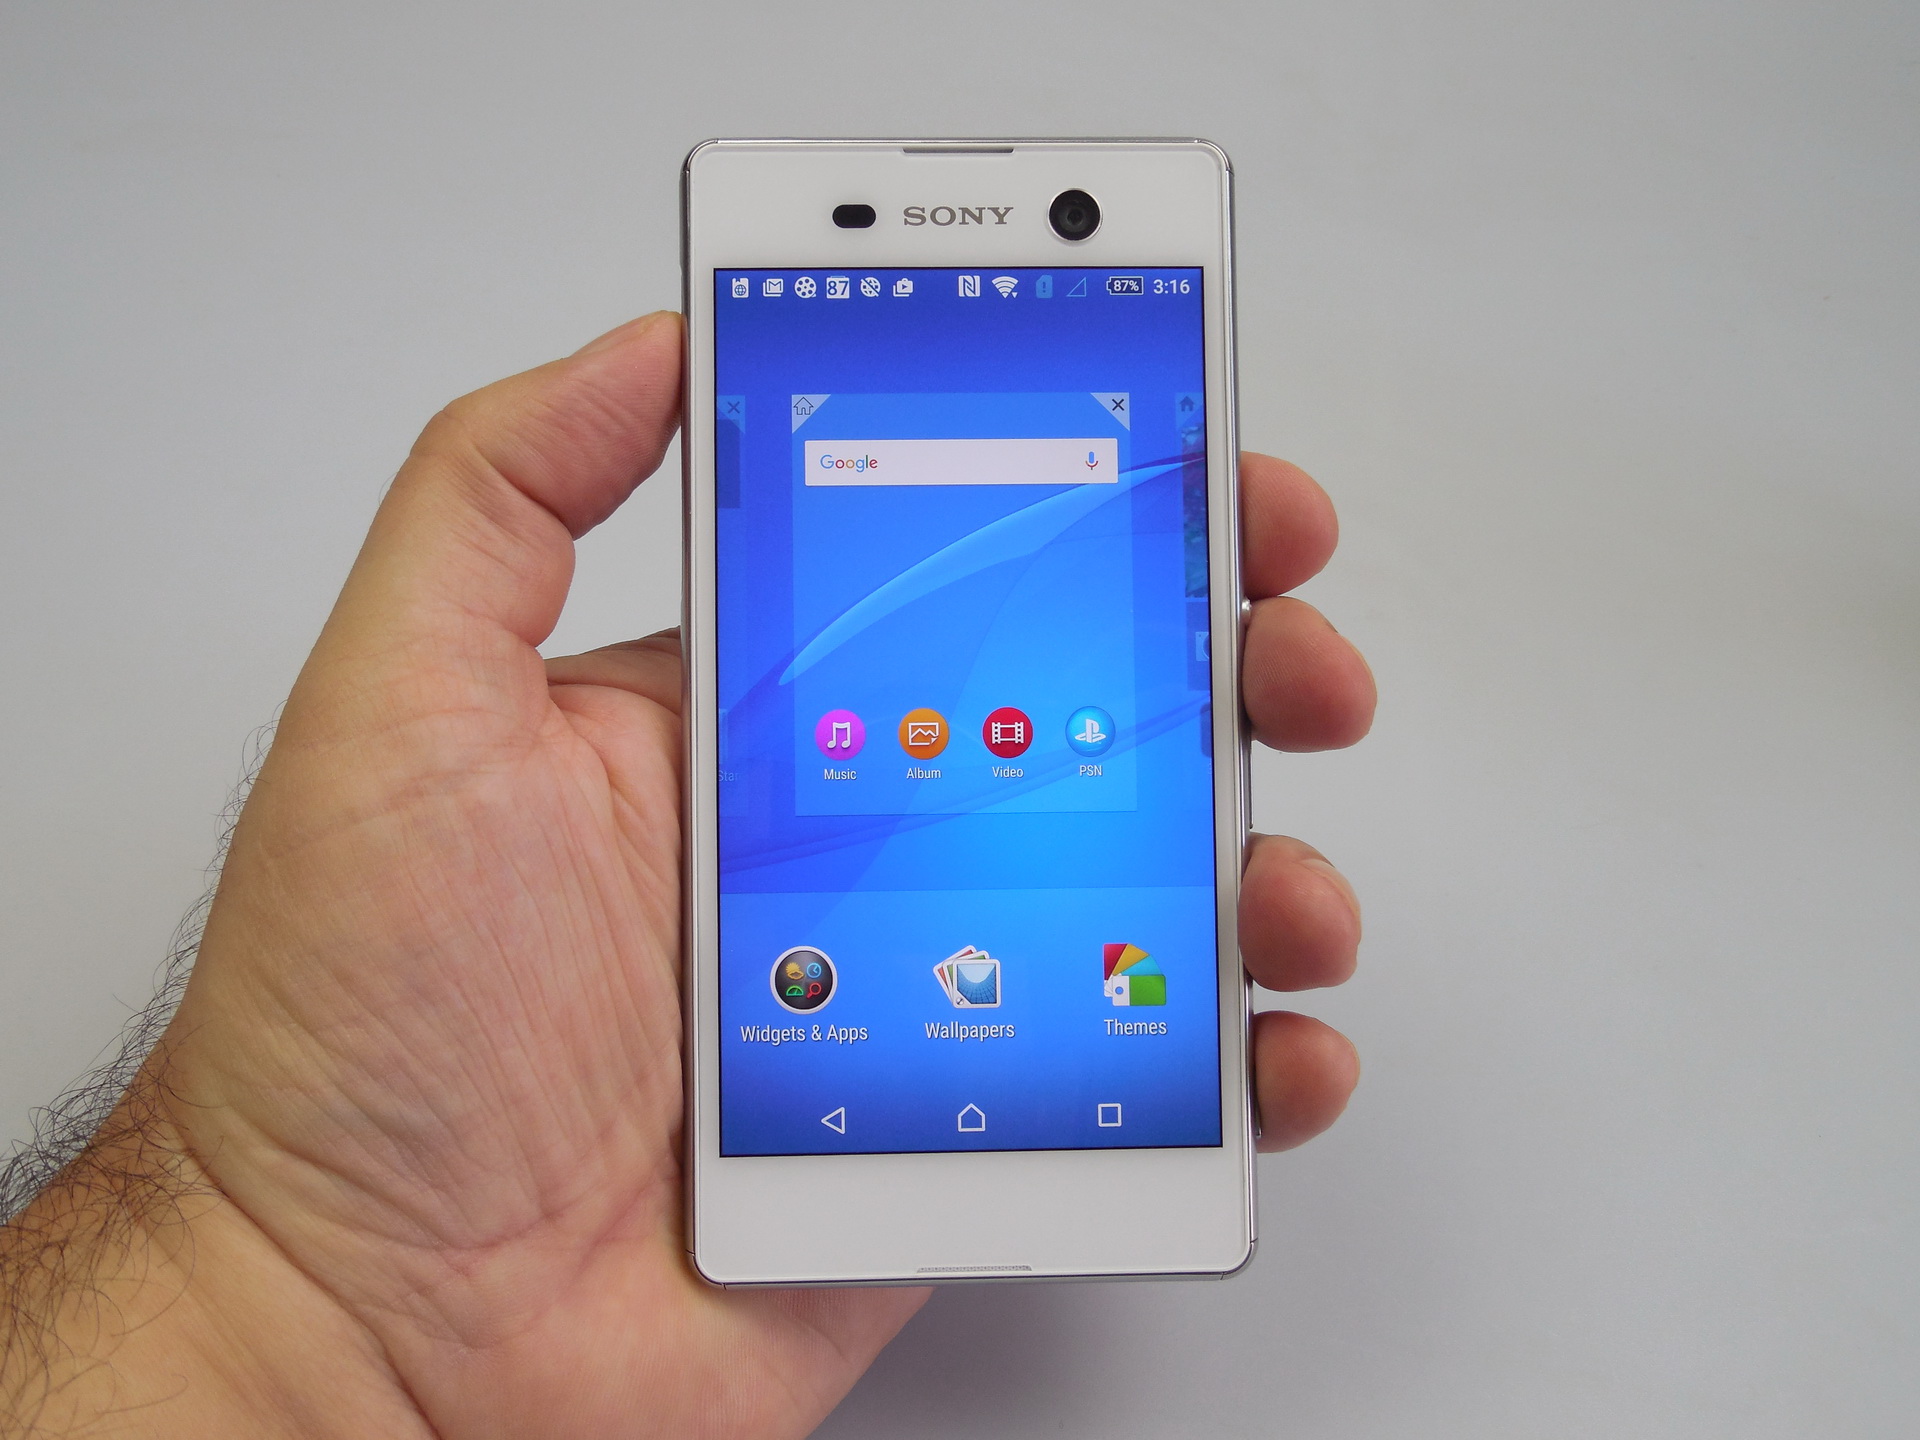 Sony Xperia M5 Dual Review: Fangled They Still Good, But Not THAT Good (Video) | GSMDome.com